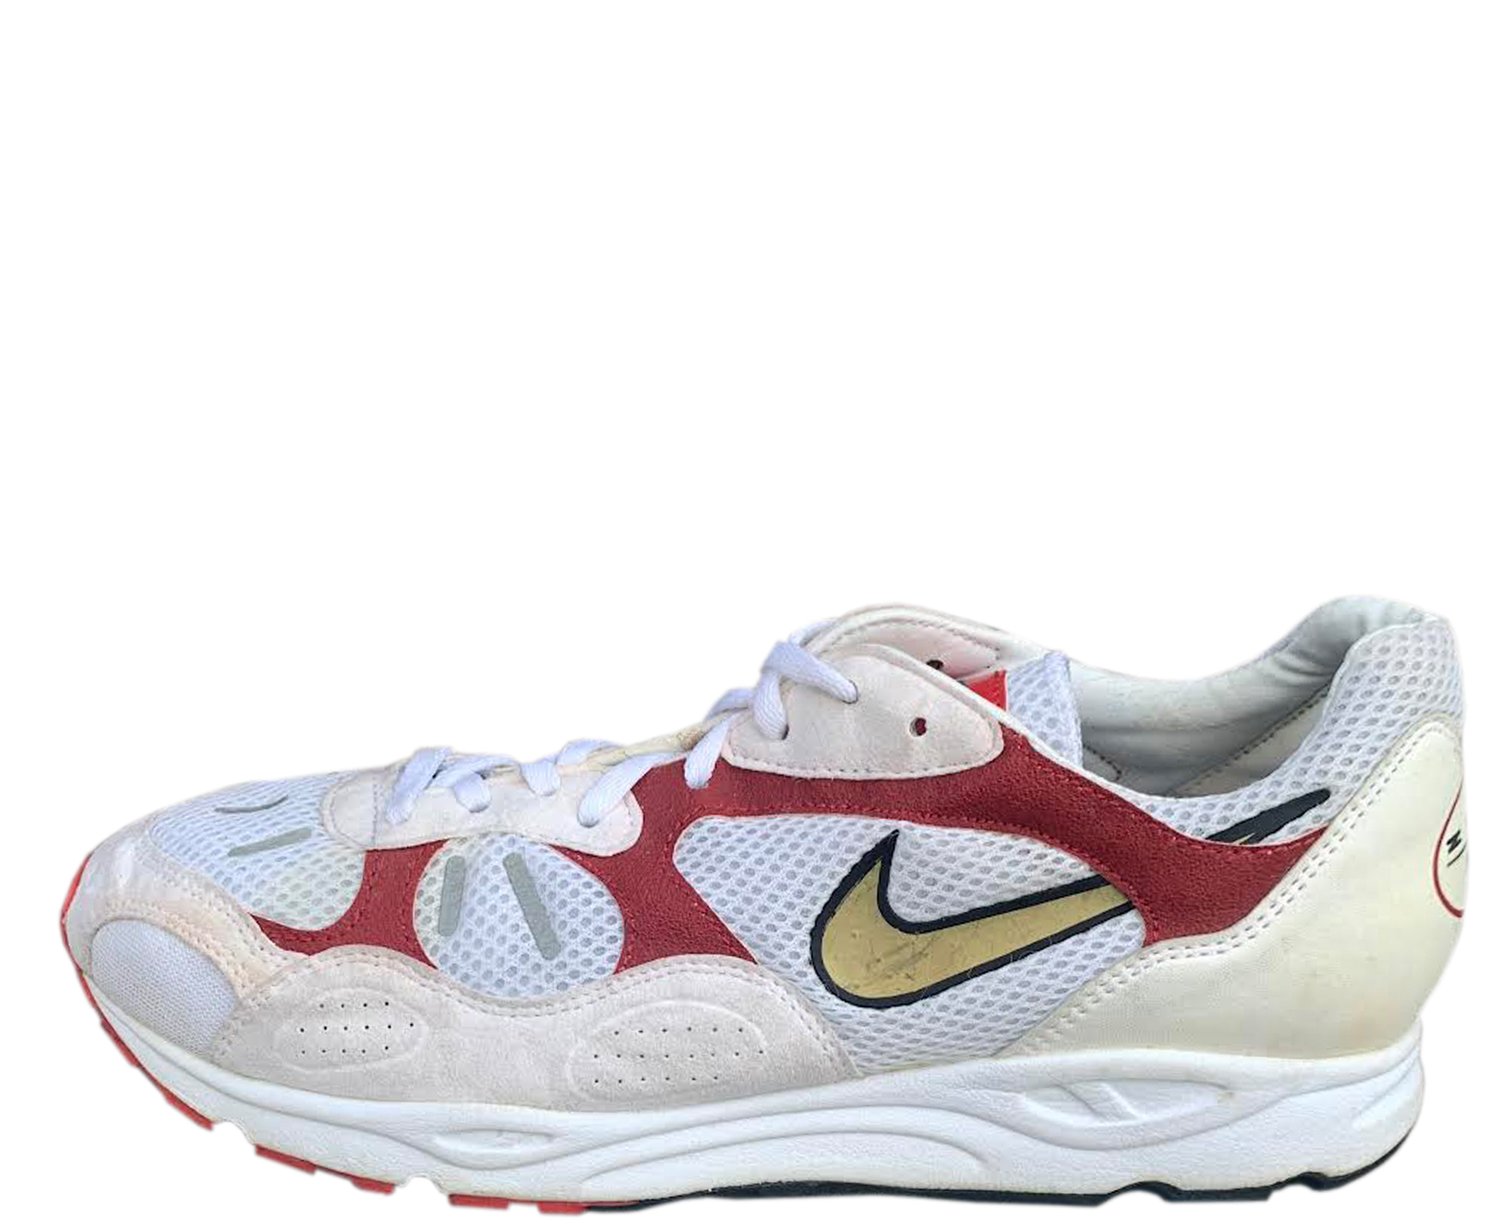 Go through Philosophical Parasite Nike Air Streak Ekiden 2 White / Gold / Red (Size 9) DS "SAMPLE" — Roots